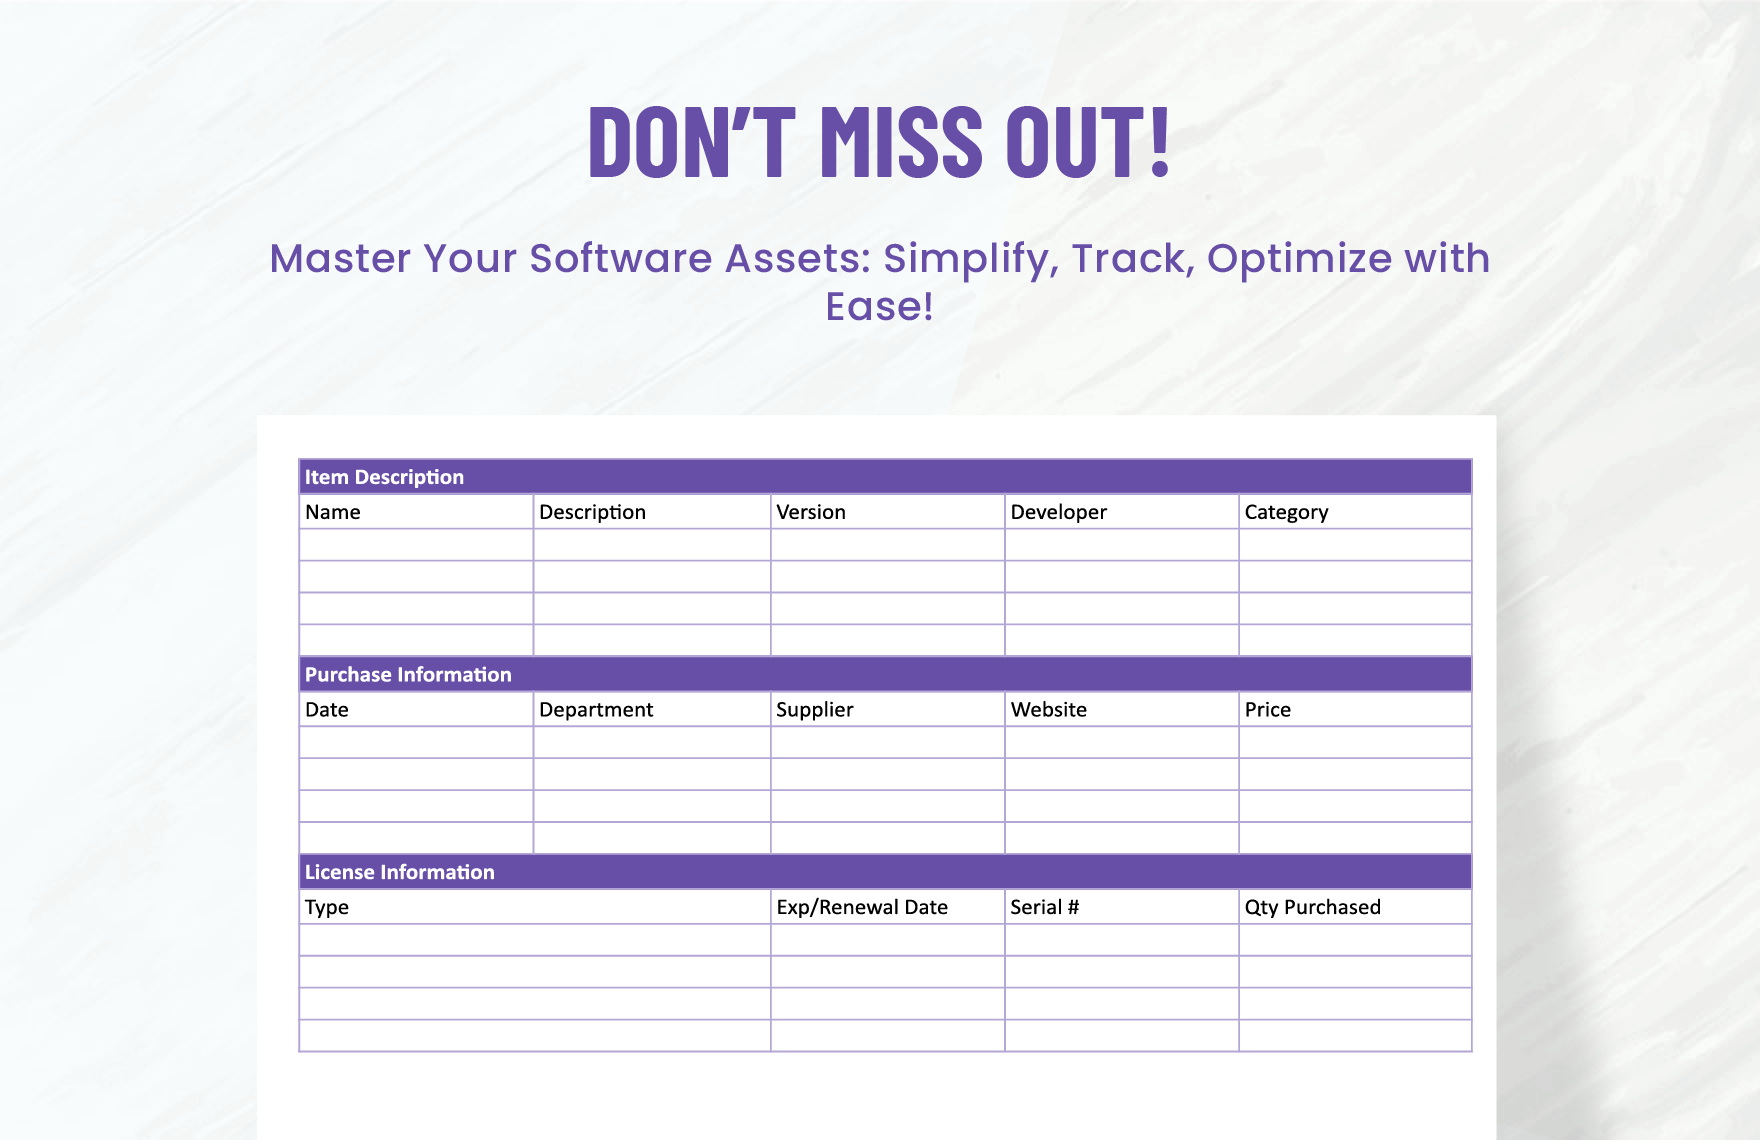 Software Inventory Tracking Template